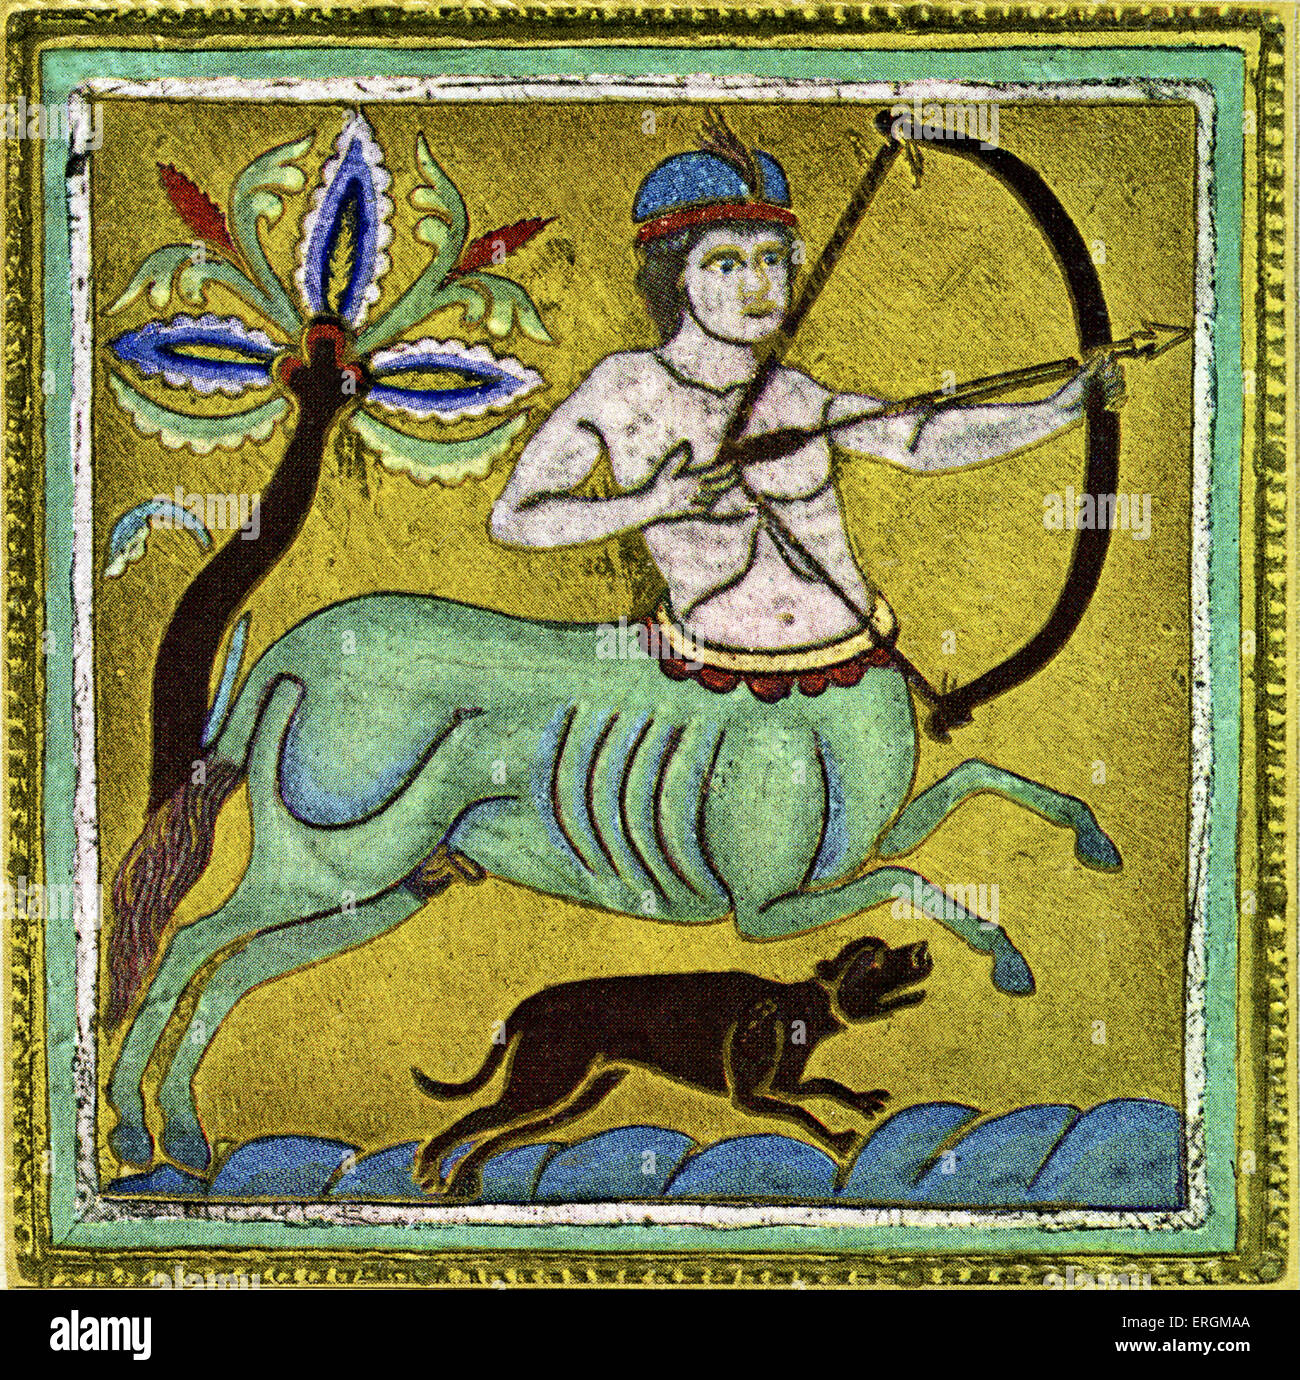 Centaur. Reproduction of an enamel plaque from from the 12th century, typical of Mosan art. Oringal: Champlevé enamel on Stock Photo